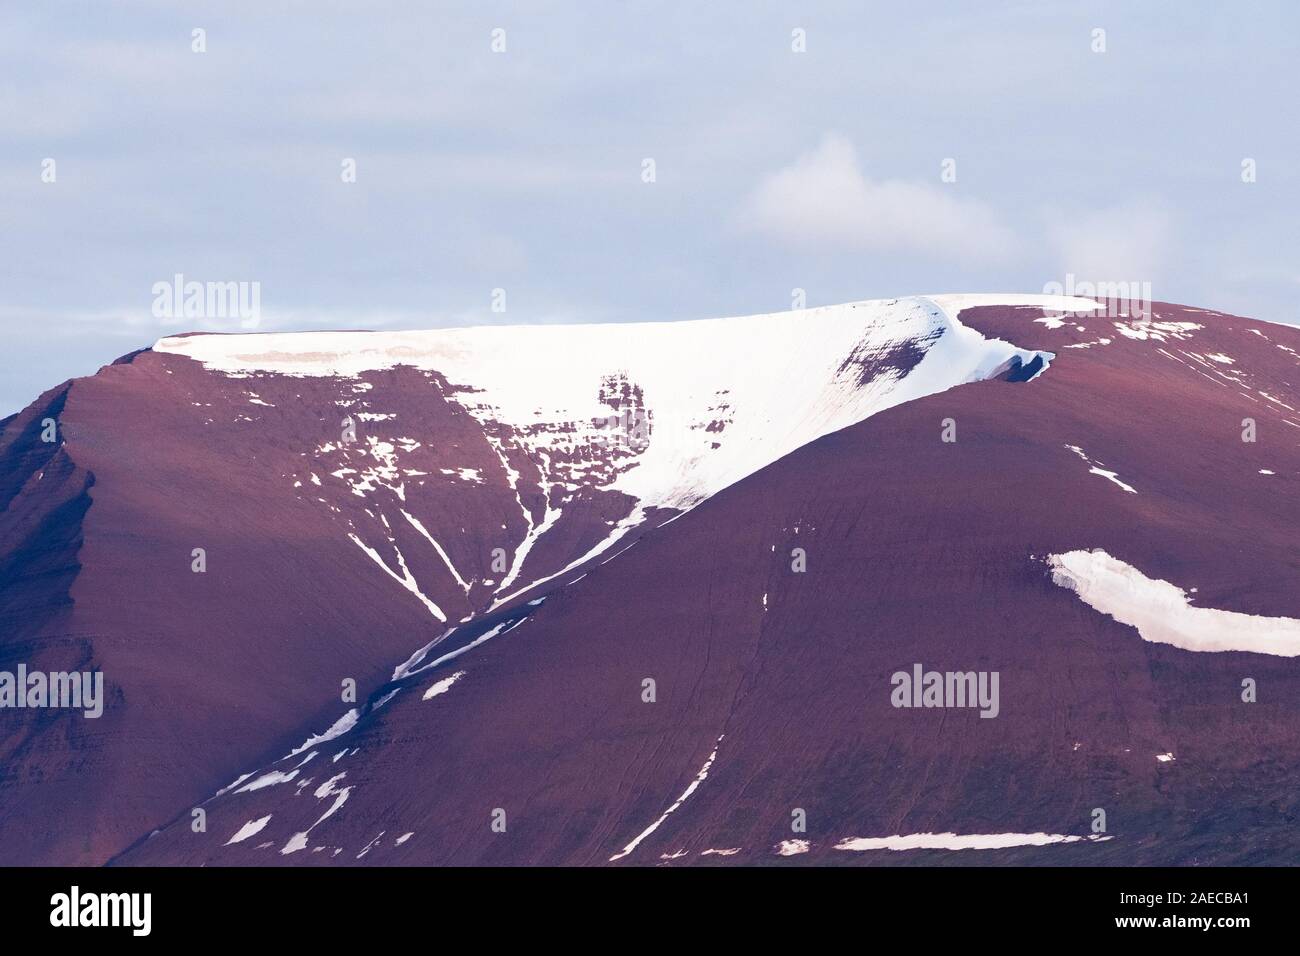 A mountain range that contains iron Minerals. Photographed Spitzbergen, Svalbard Islands, Norway Stock Photo